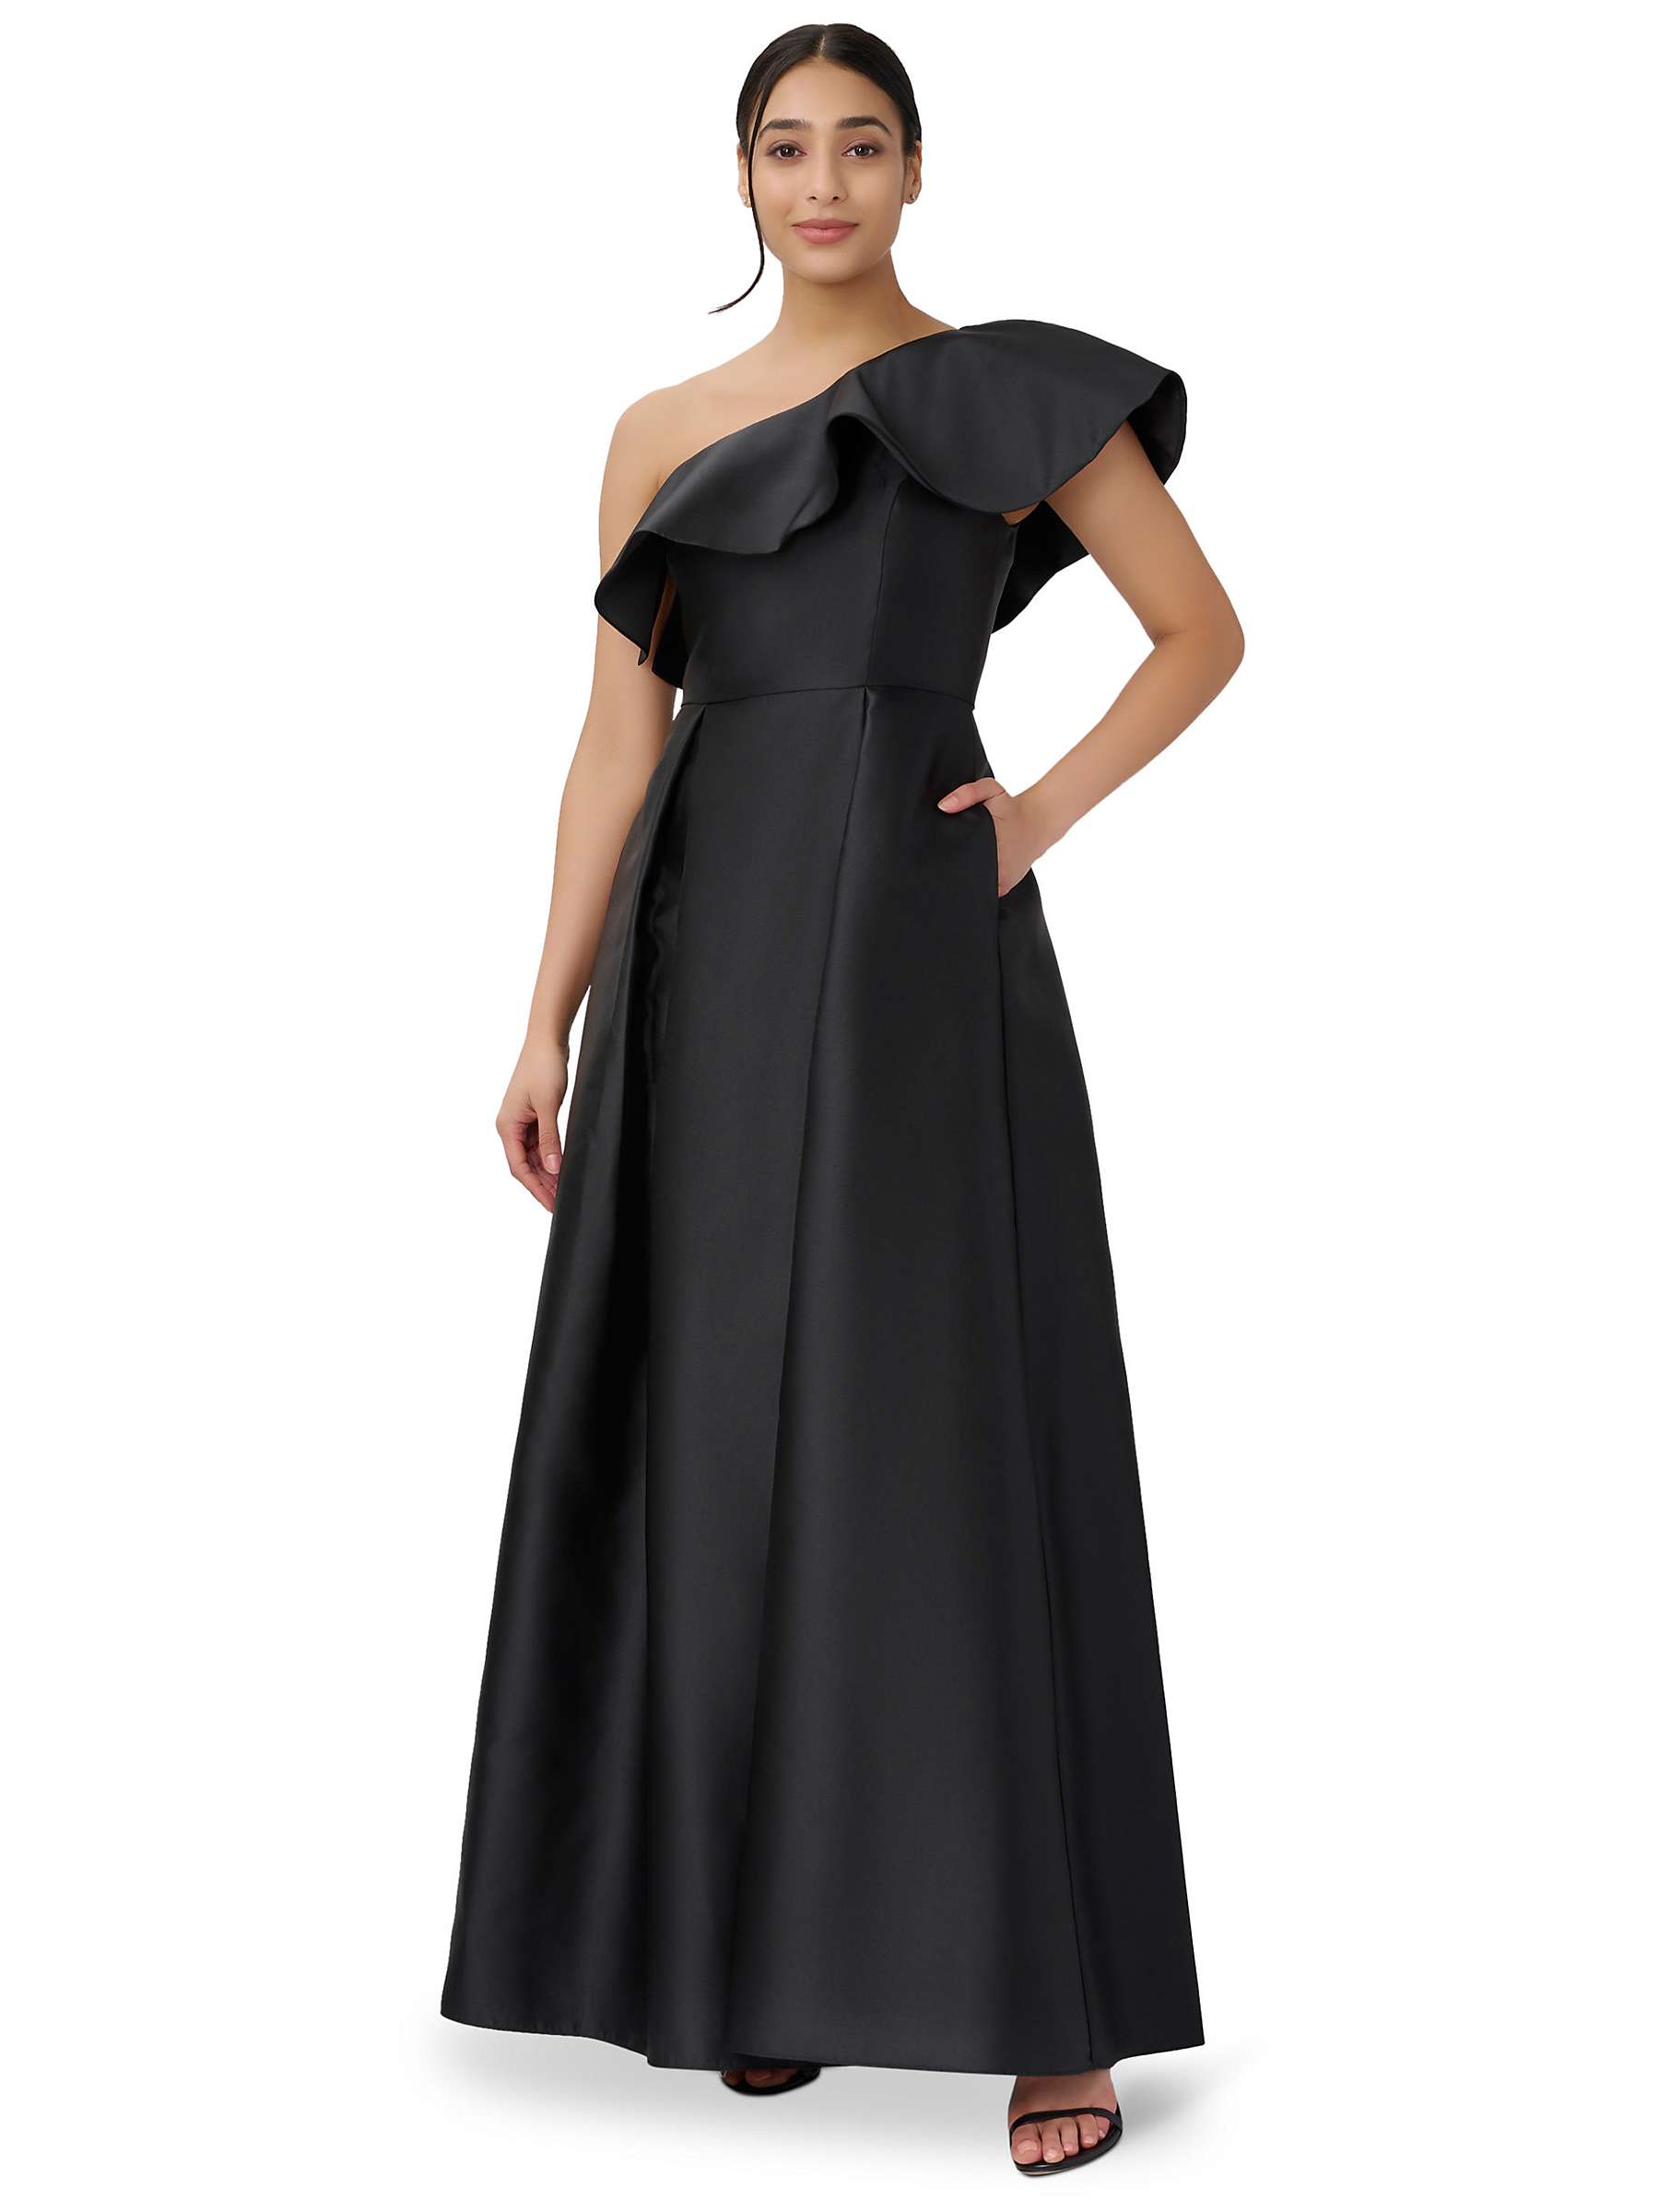 Adrianna Papell One Shoulder Mikado Gown, Black at John Lewis & Partners